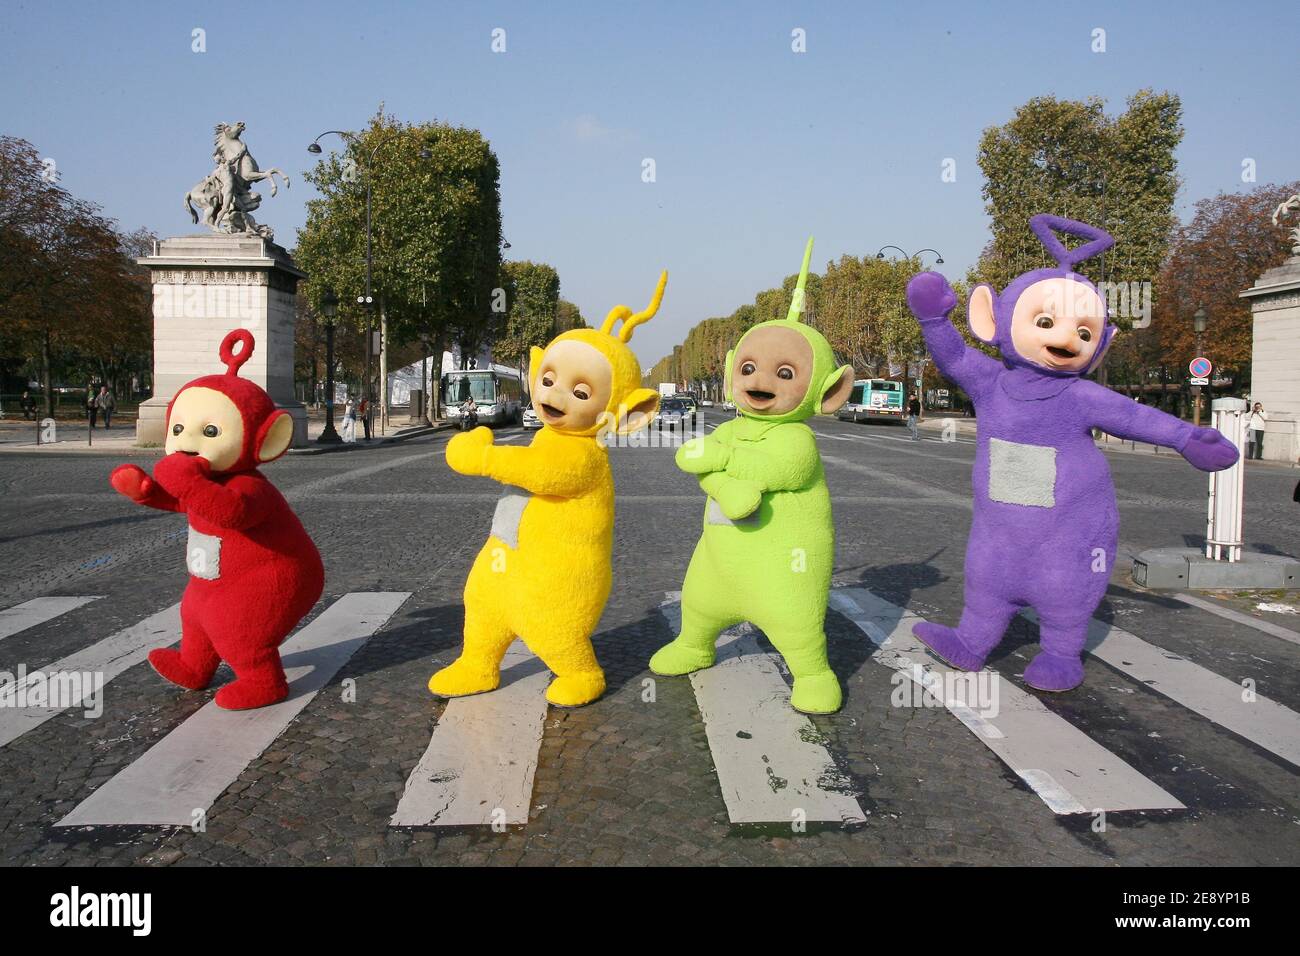 The Teletubbies, Tinky Winky, Dipsy, Laa-Laa and Po on the Place de la Concorde in Paris, for the first time in France to celebrate their 10th anniversary on October 15, 2007. Photo by Mousse/ABACAPRESS.COM Stock Photo